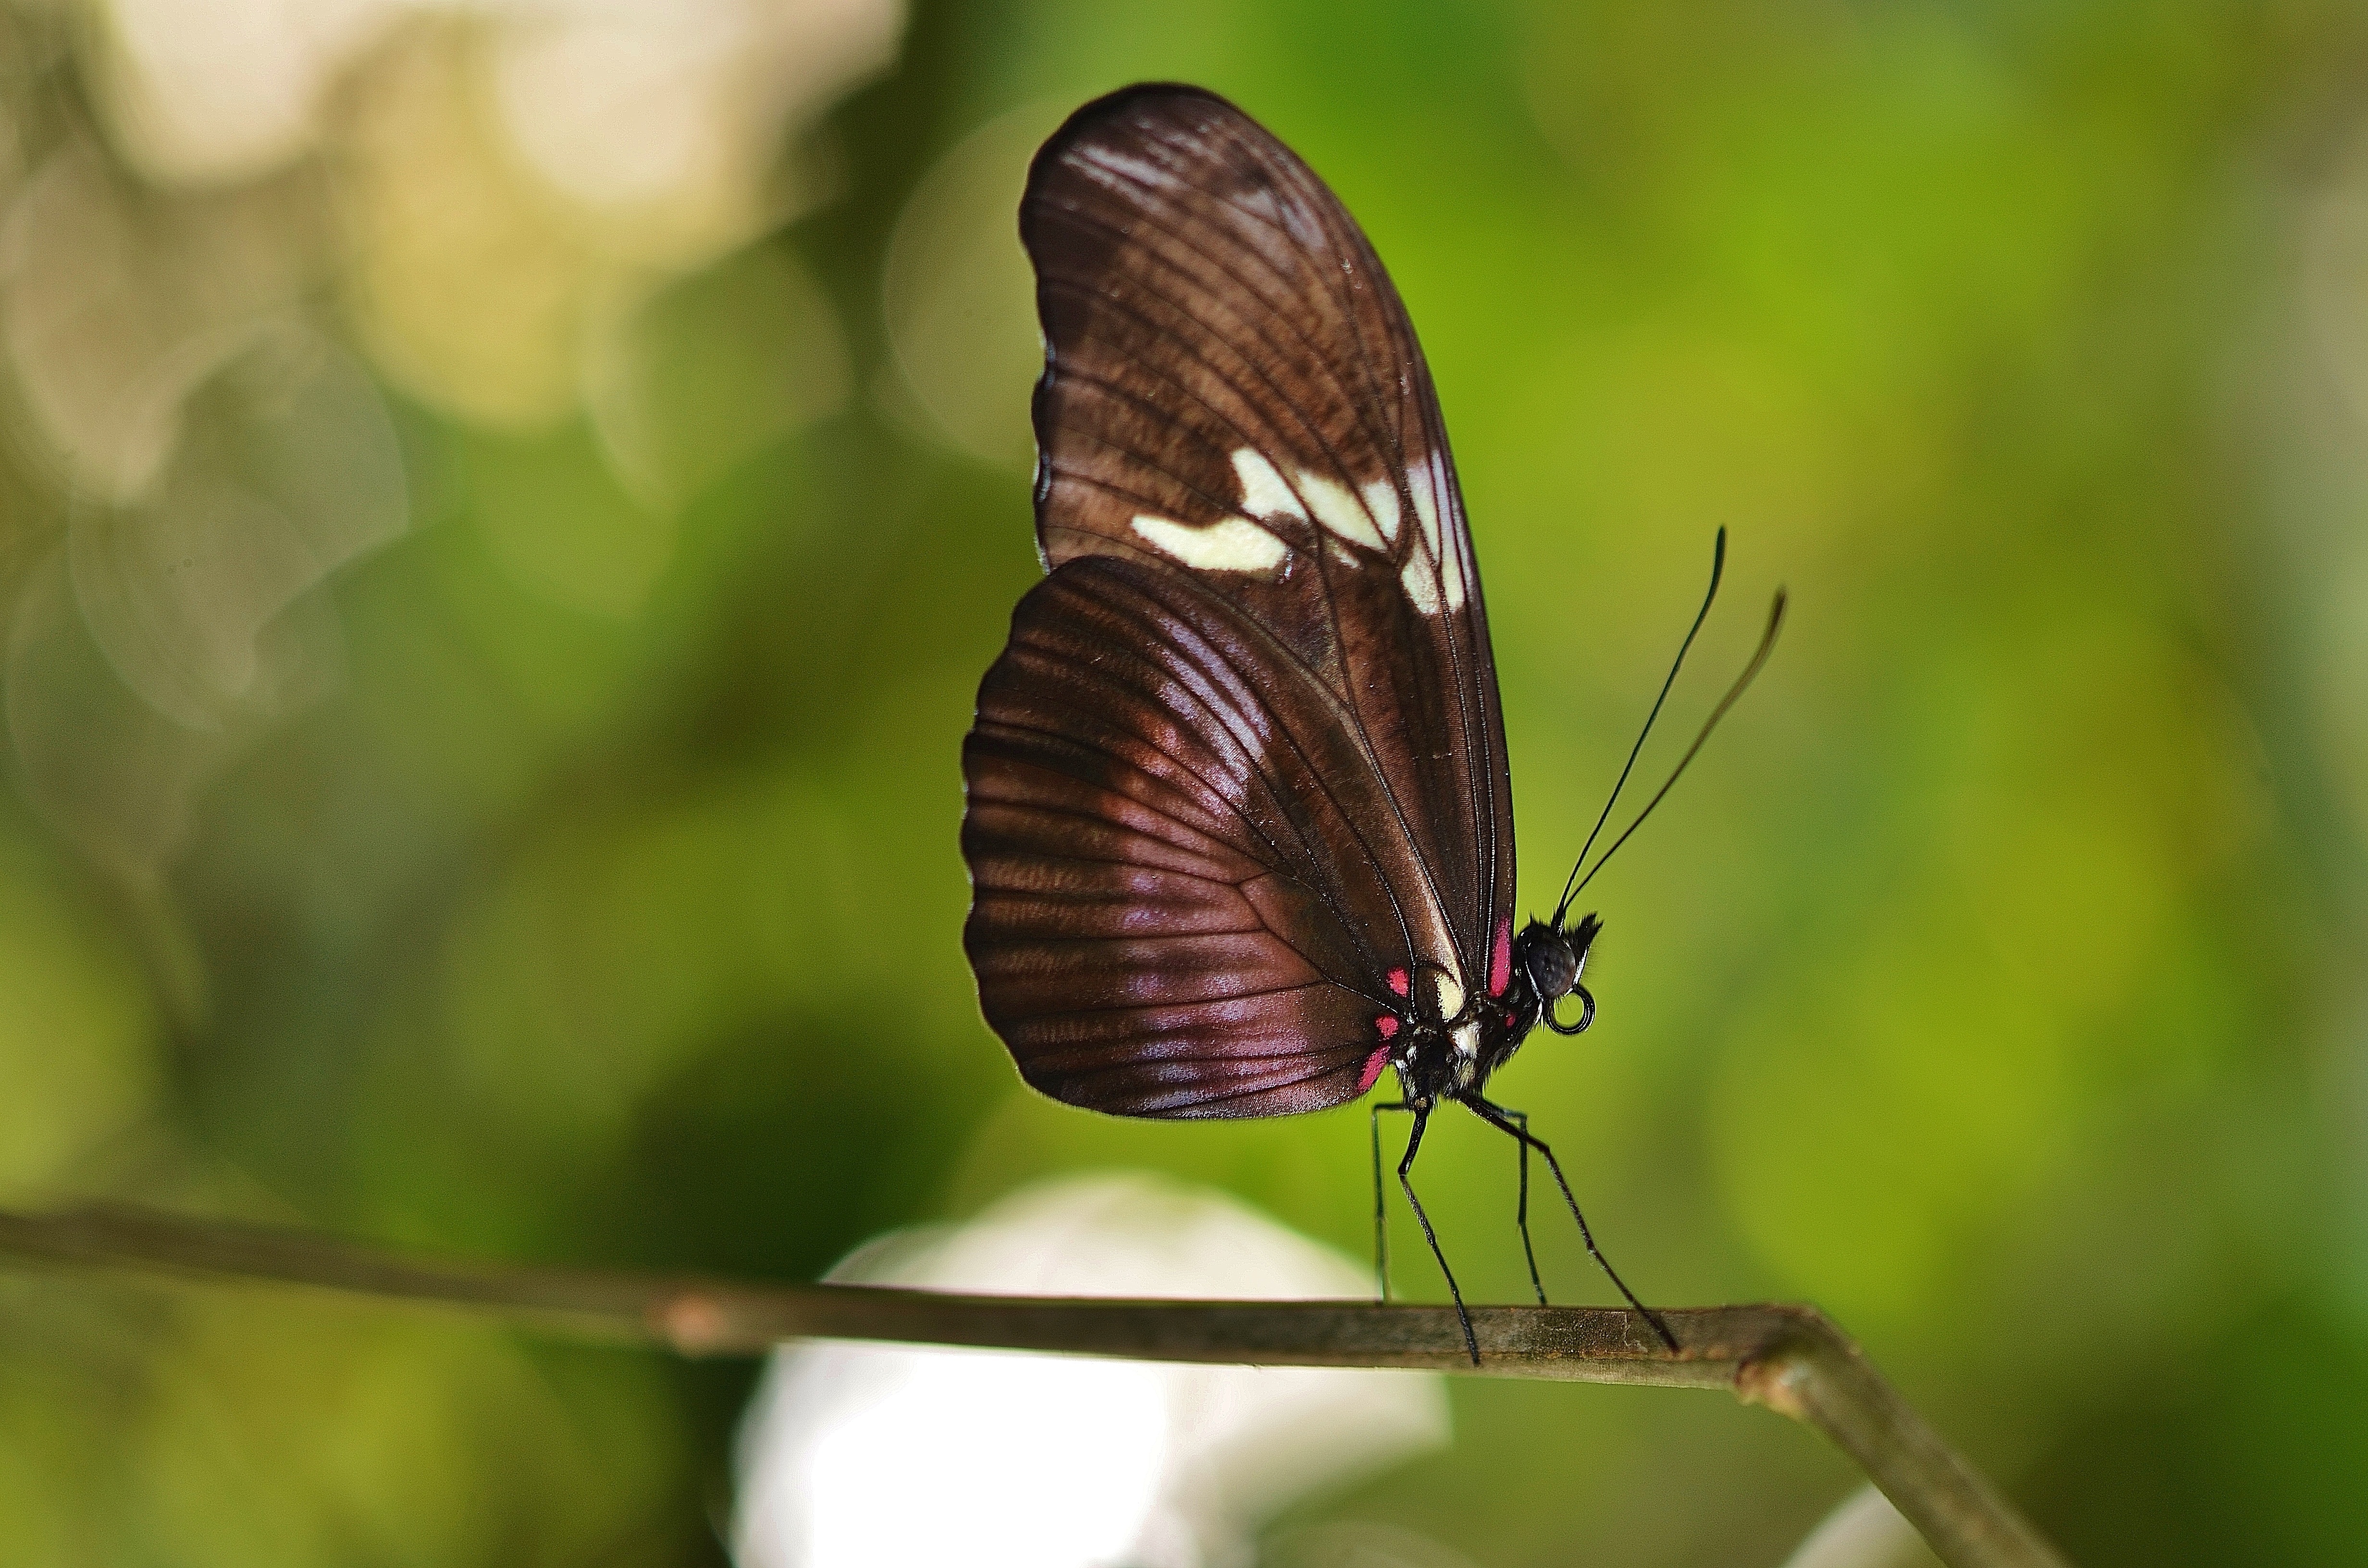 brown butterfly on tree branch during daytime